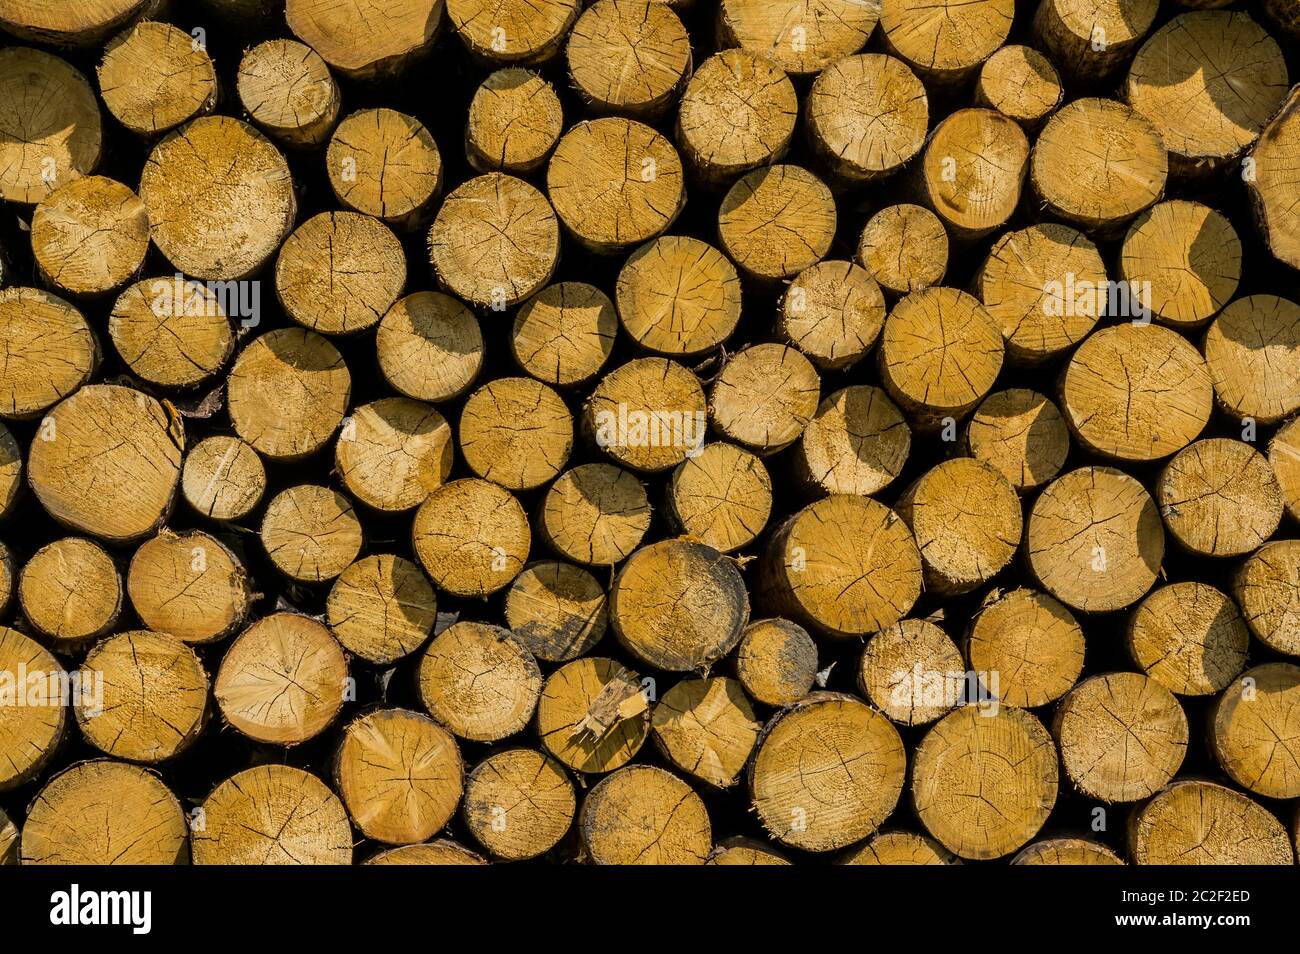 stack of freshly cut wood from a forest Stock Photo